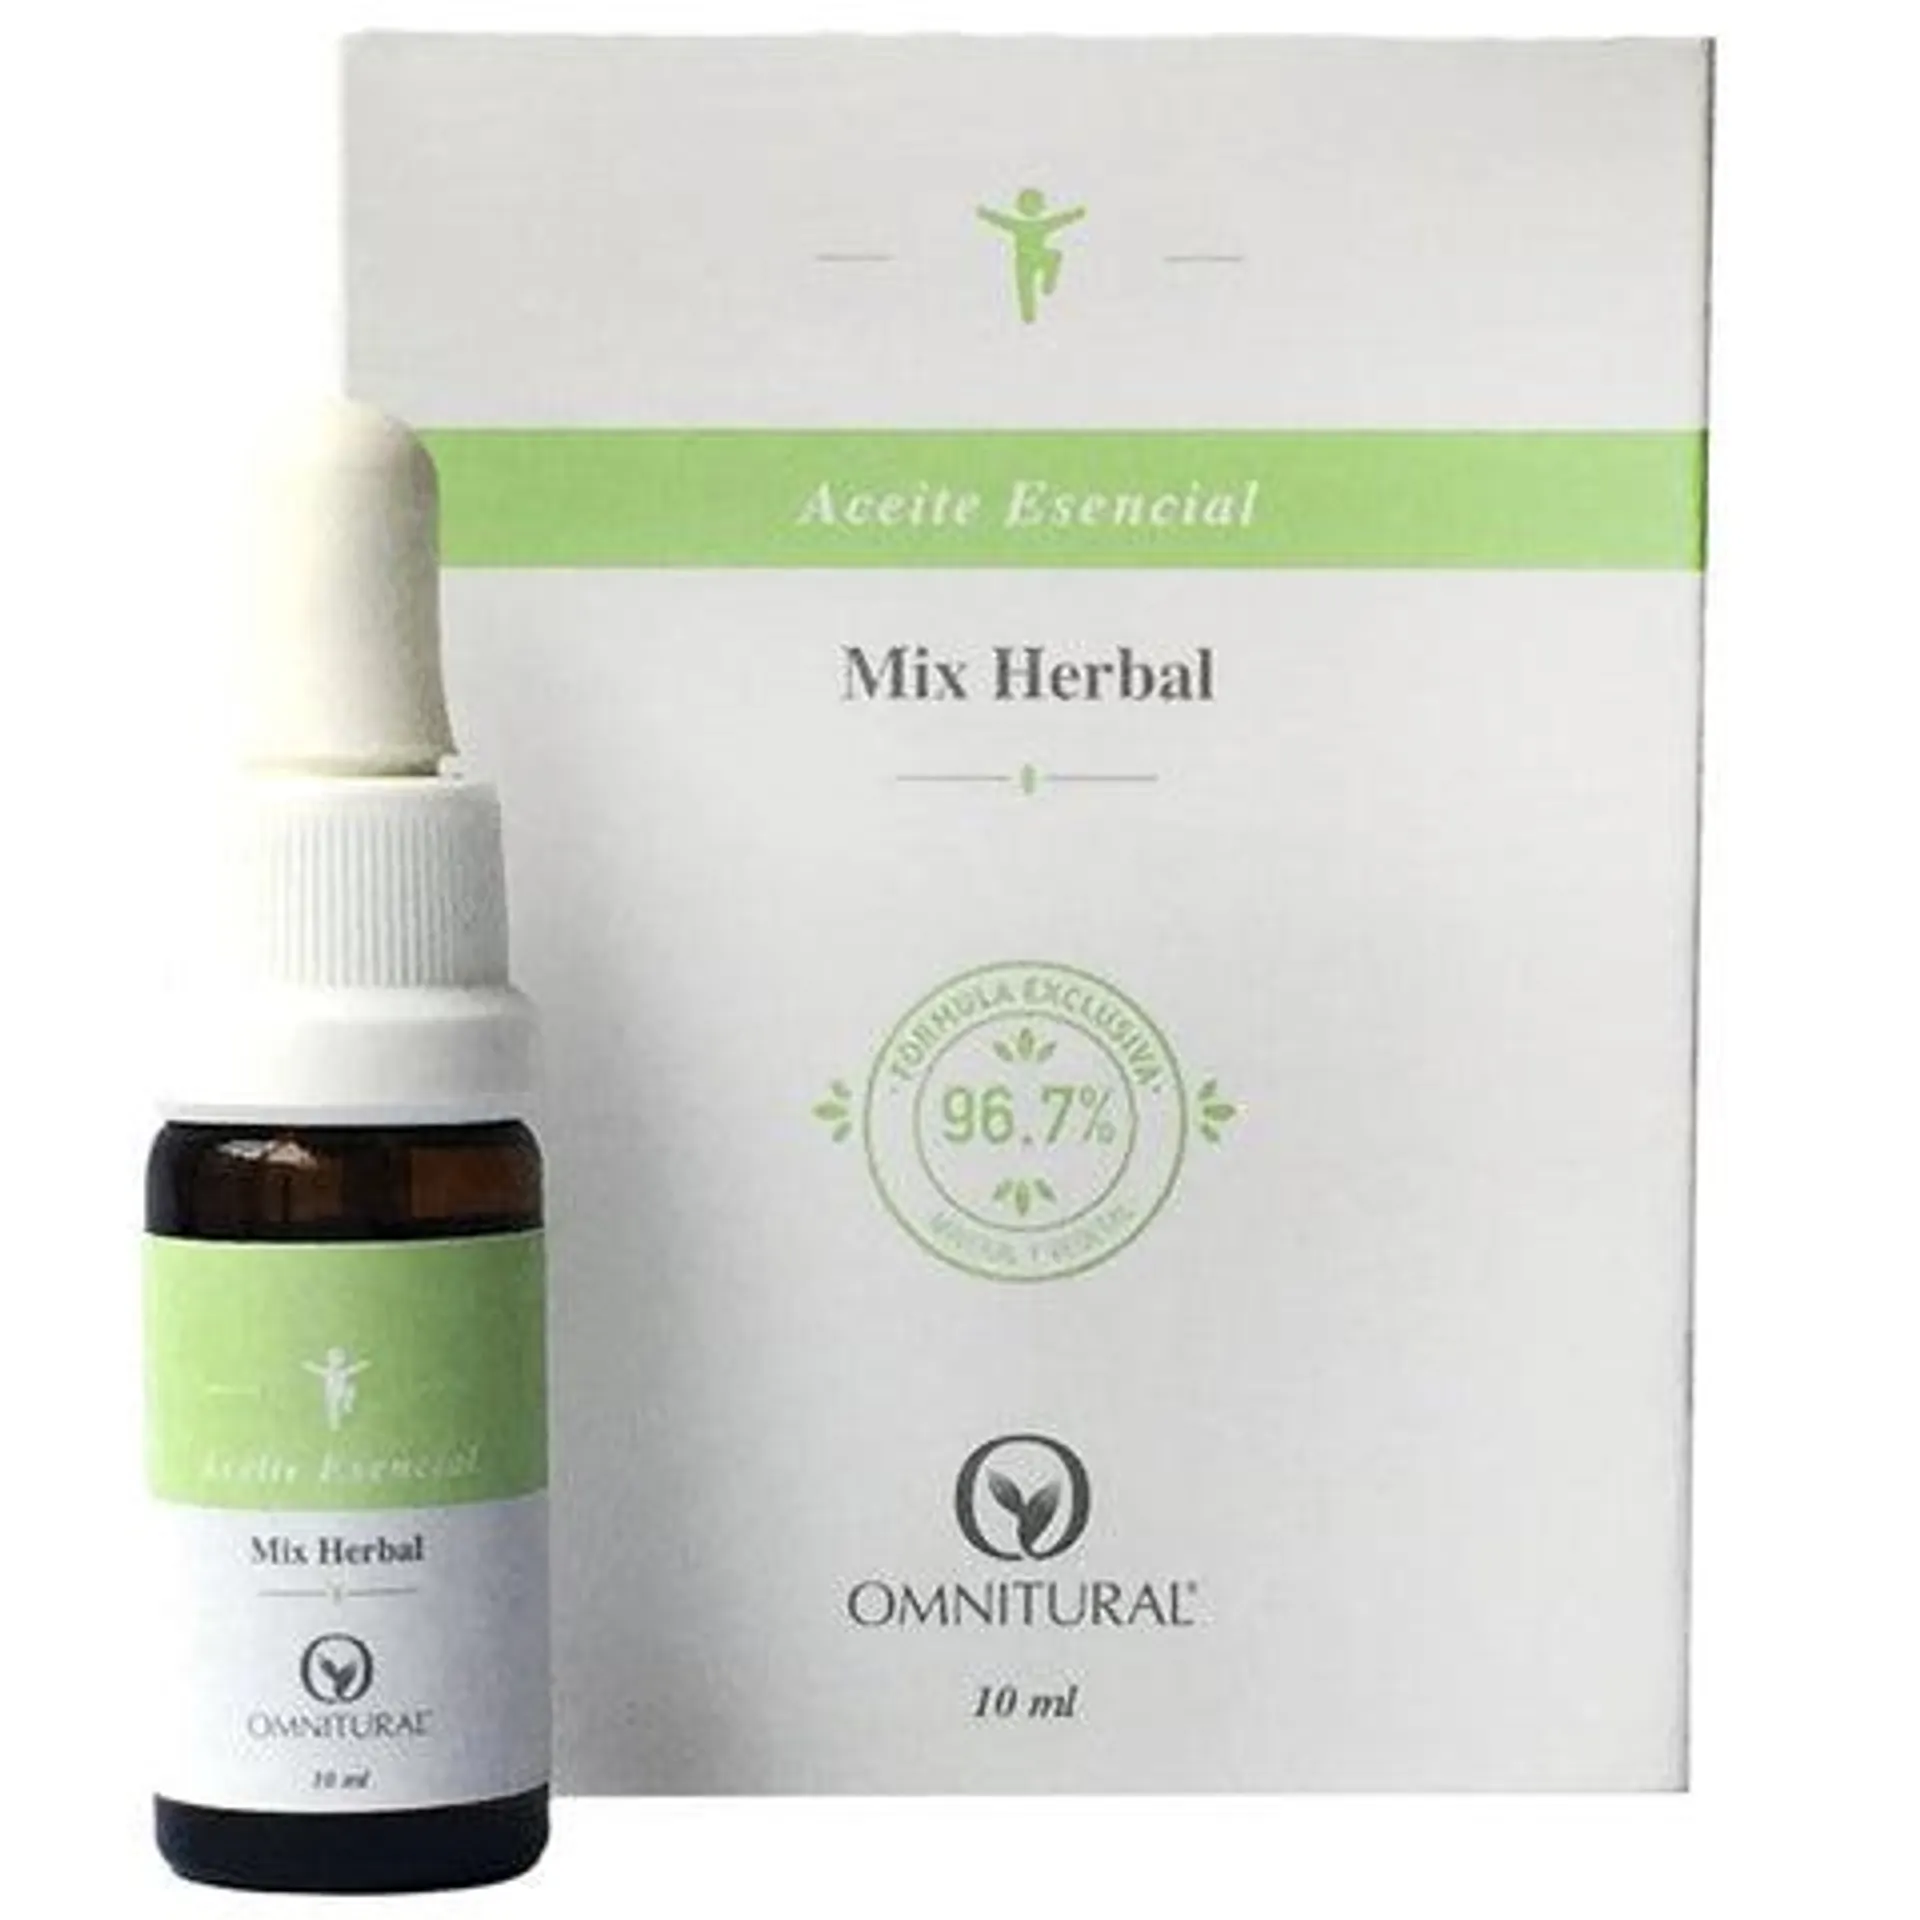 Aceite mix herbal x 10 ml